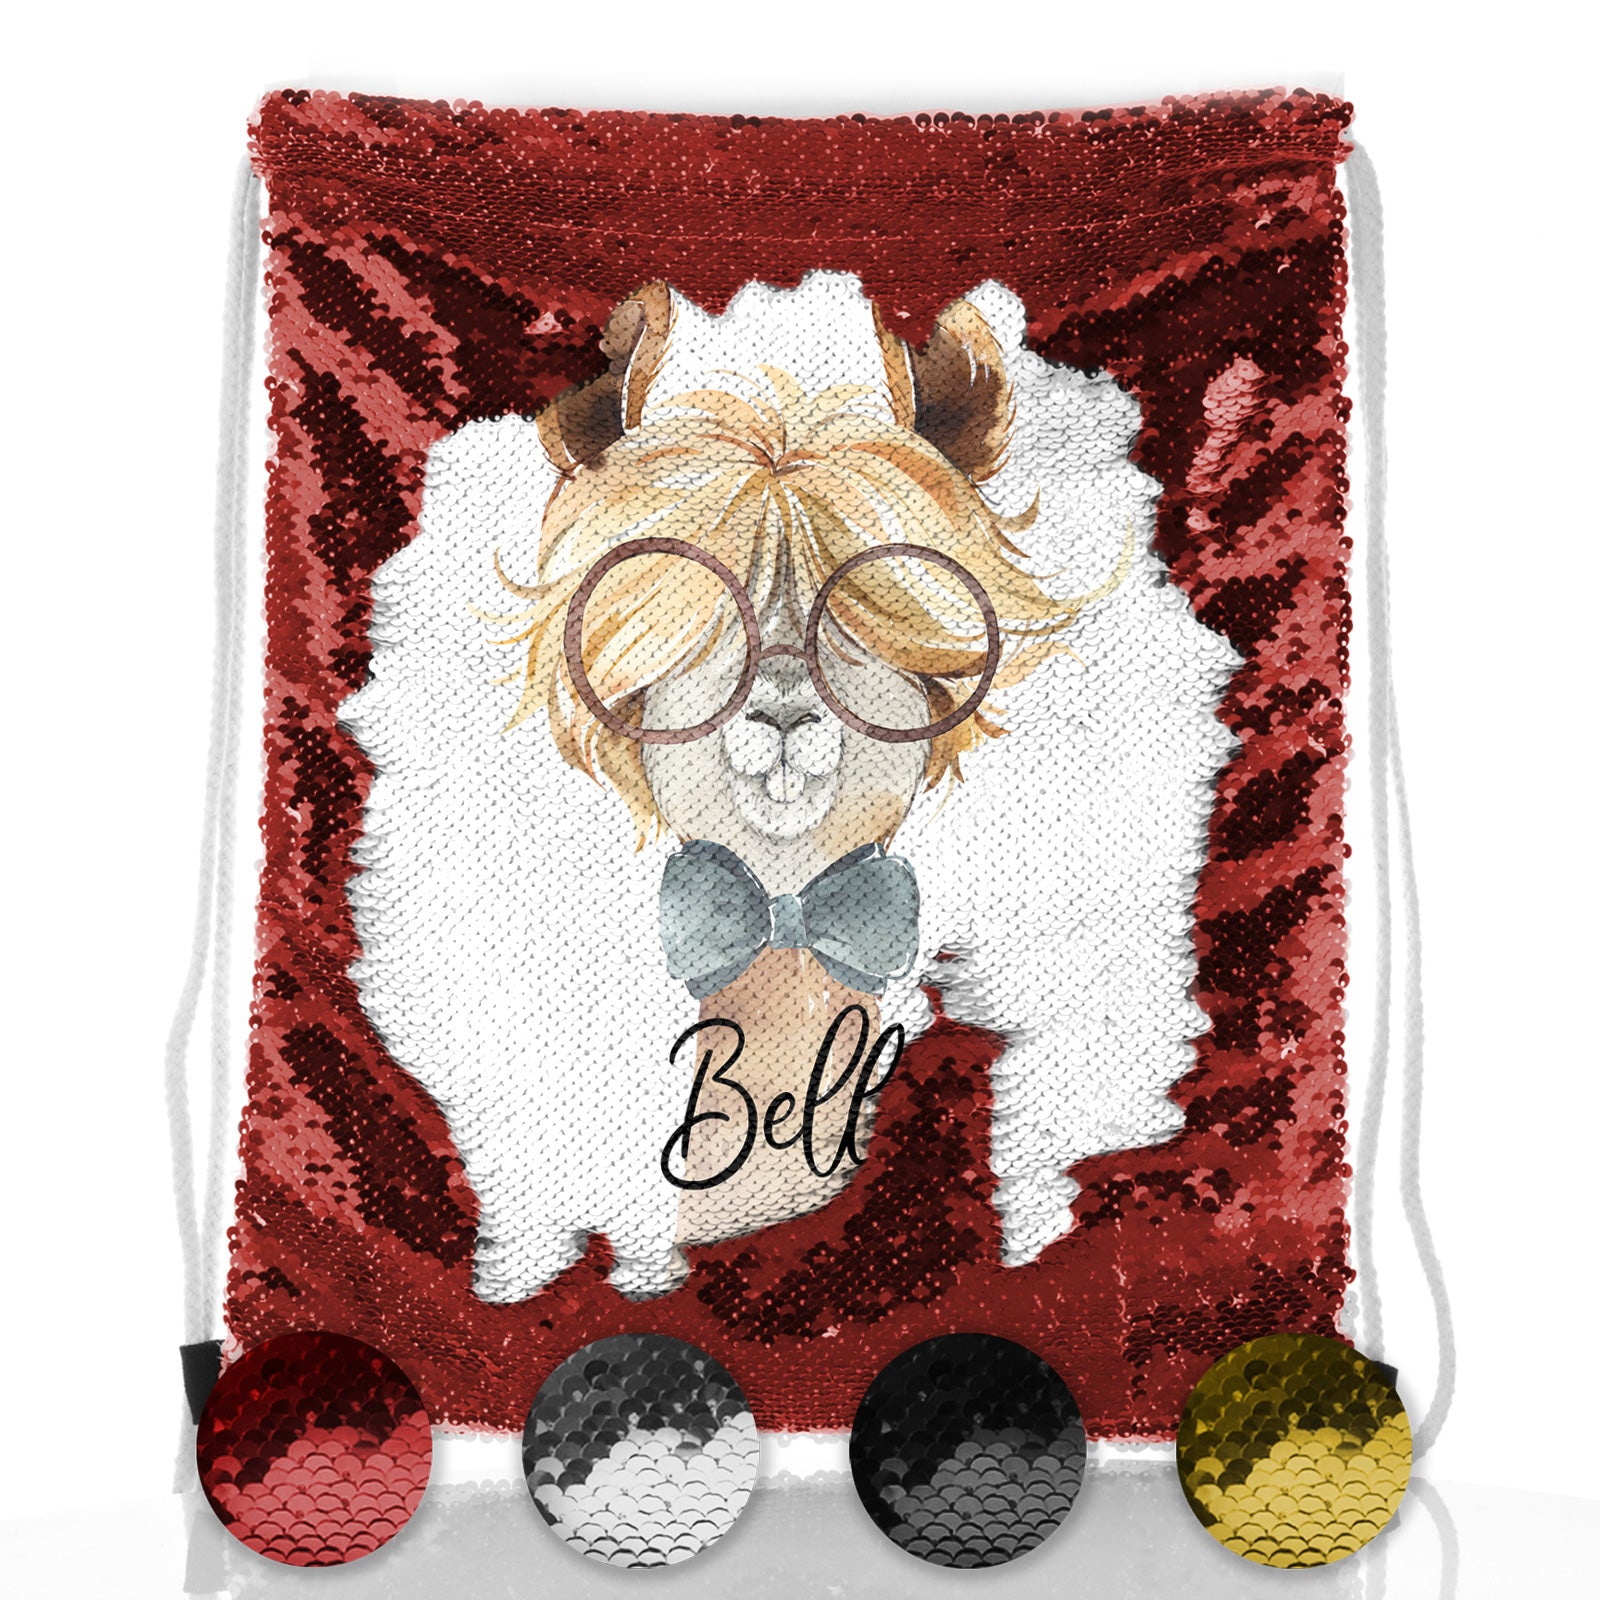 Personalised Sequin Drawstring Backpack with Alpaca Bow Tie and Glasses and Cute Text